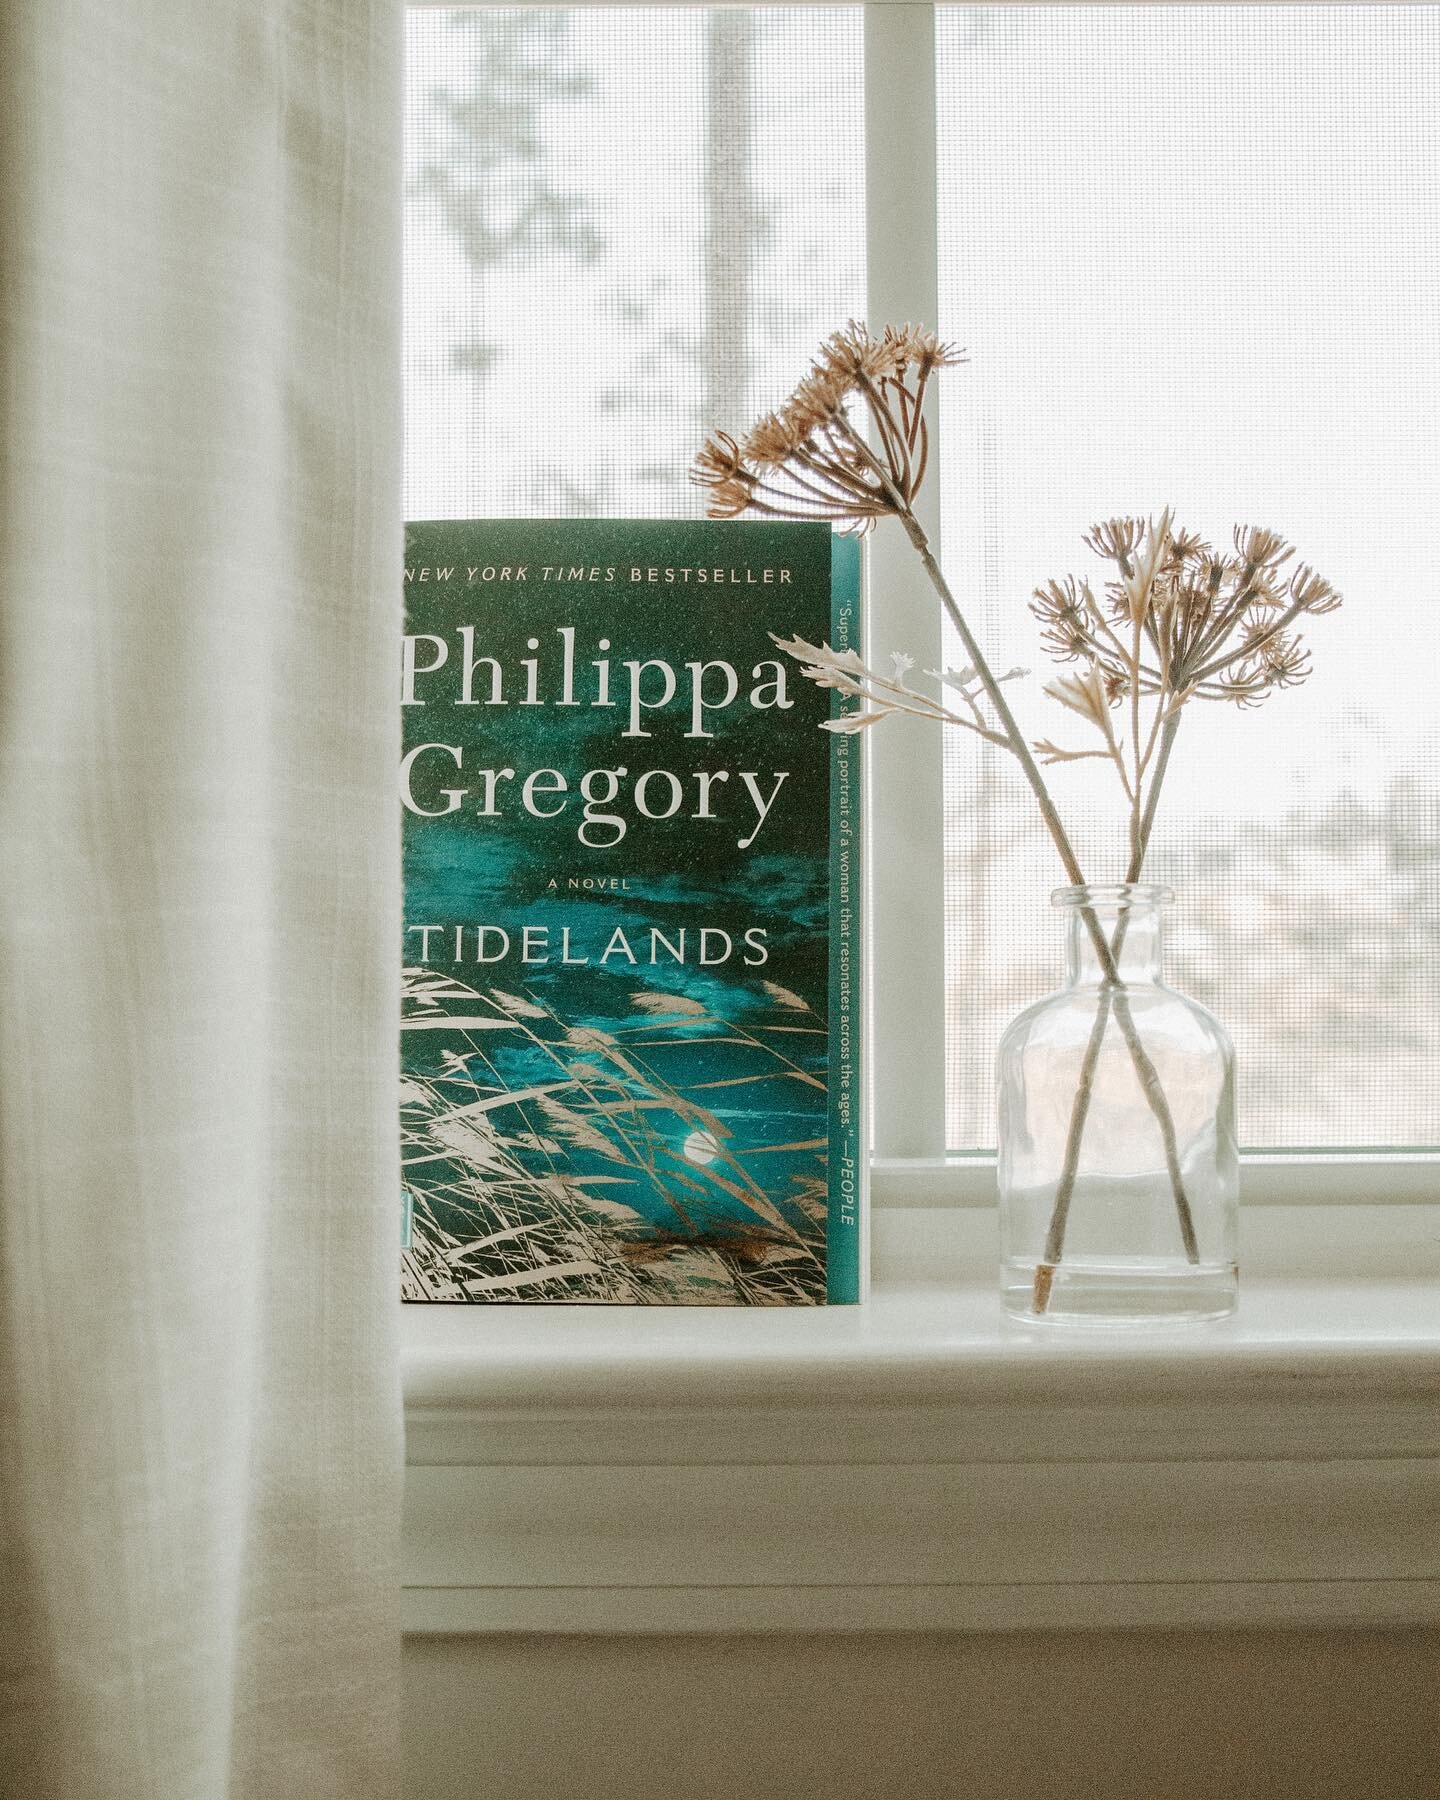 Did anyone else forget what day it is? I totally did.

Qotd: do you plan how many books you&rsquo;ll read each month or are you like me and totally wing it depending on life stuff?

Speaking of - I really need to finally read a Philippa Gregory book!